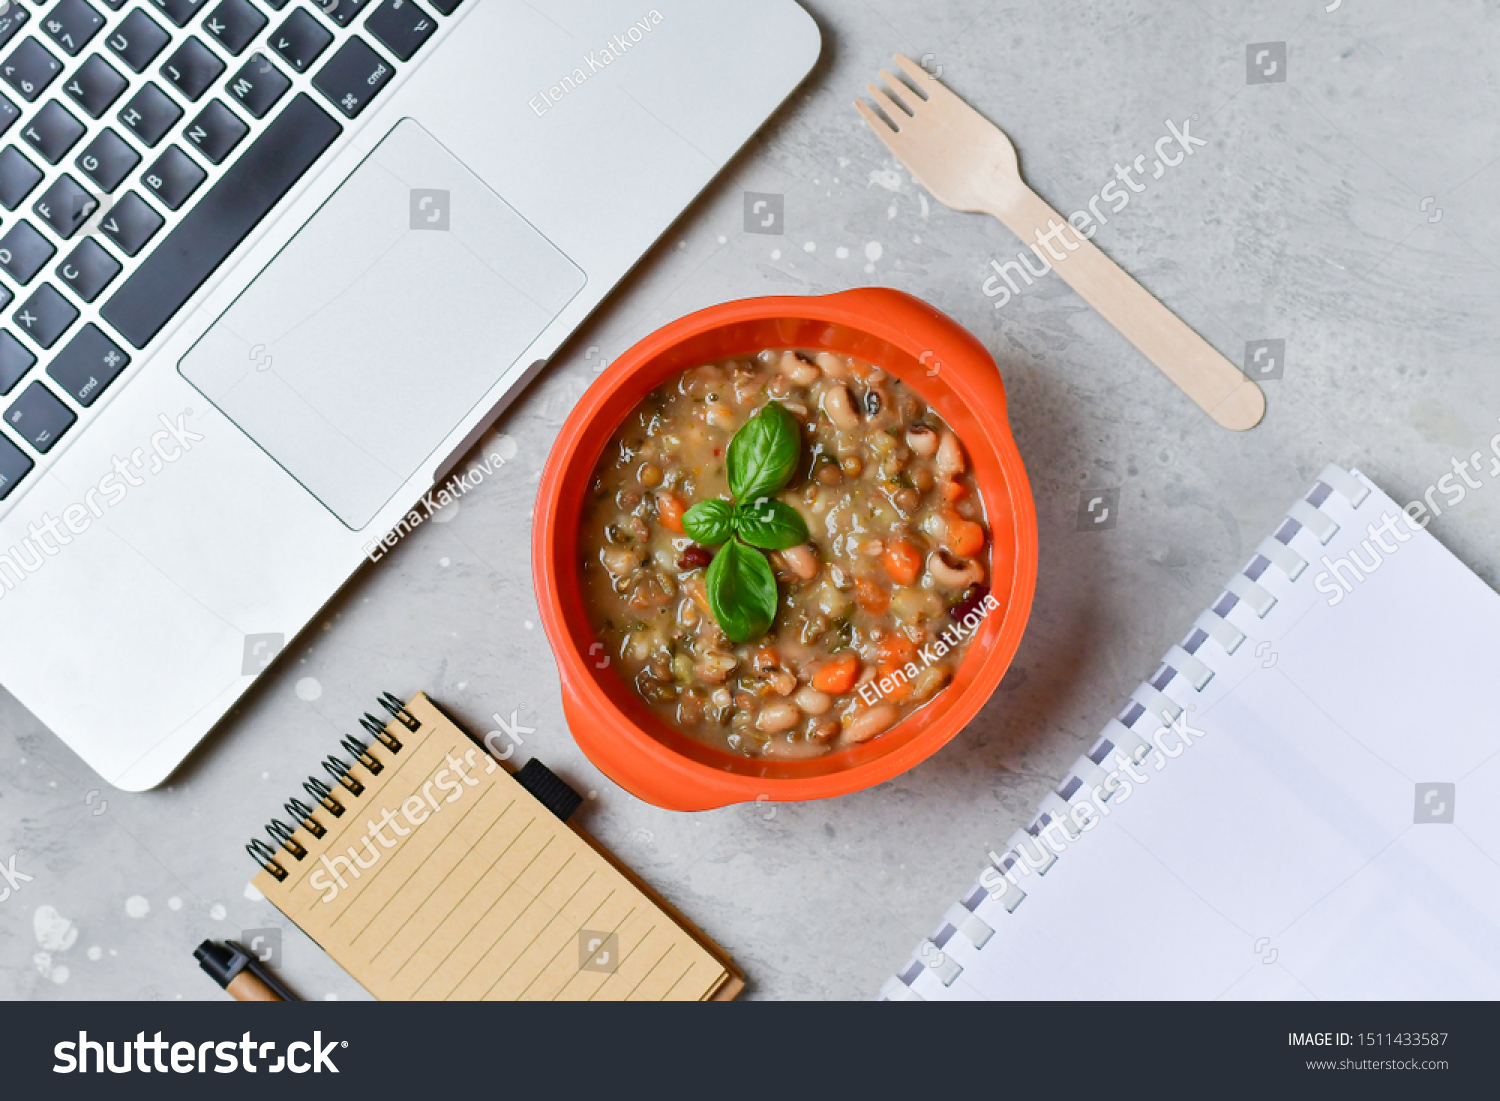 Food delivery. Round lunch box with a diet lunch or dinner on grey office table. Stewed beans with vegetables, takeaway lunch at the office. Top view. takeout healthy lunch. selective focus #1511433587